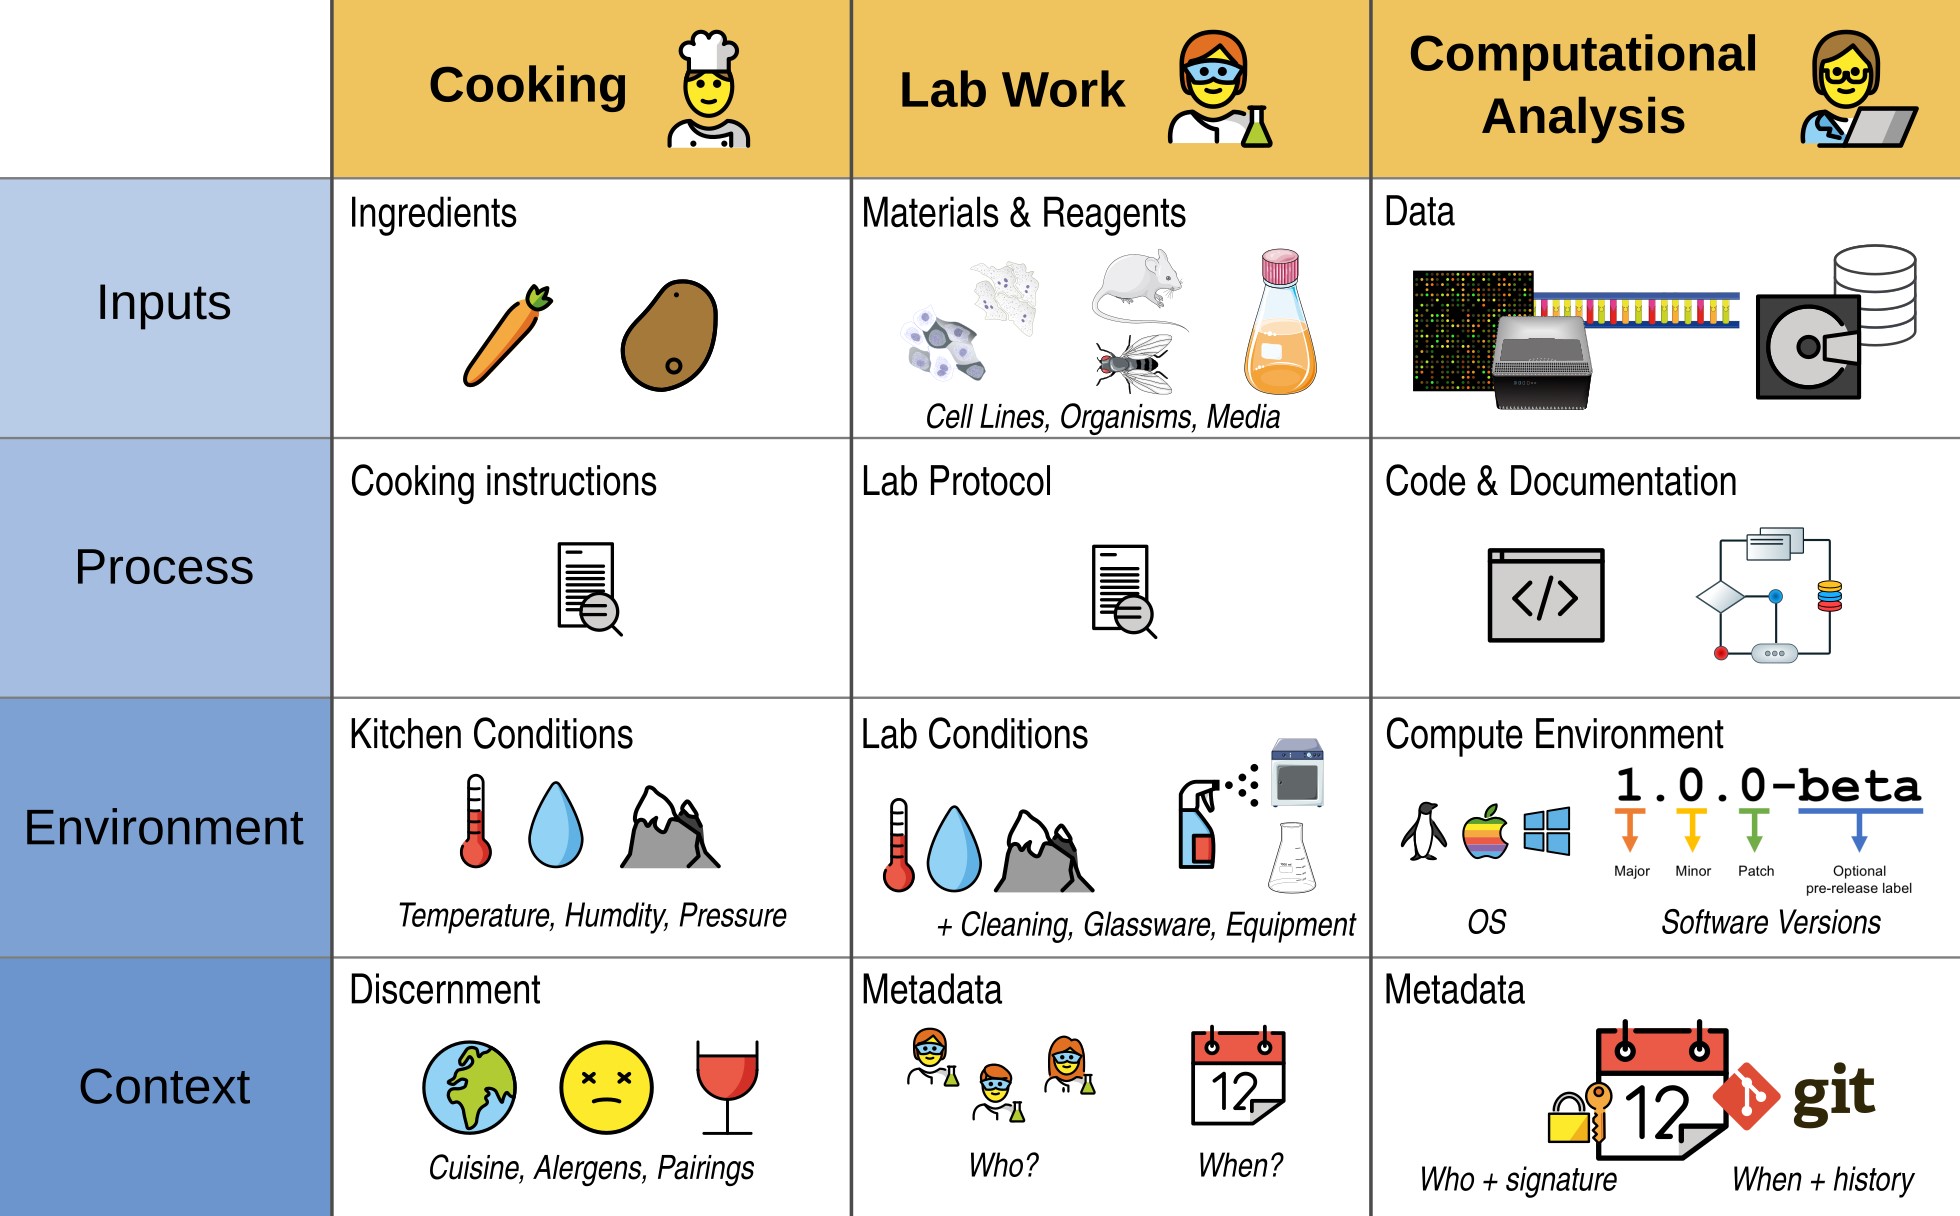 A table with three columns titled: Cooking, Lab work, and Computational analysis. There are four rows: Inputs, Process, Environment, and Context.  For cooking the inputs are the ingredients. For lab work they are materials and reagents like cell lines, organisms, and media. For computational analysis they are the data. For cooking the process are the cooking instructions. For lab work the lab protocol. For computational analysis this is the code and documentation. For cooking the environment are the conditi